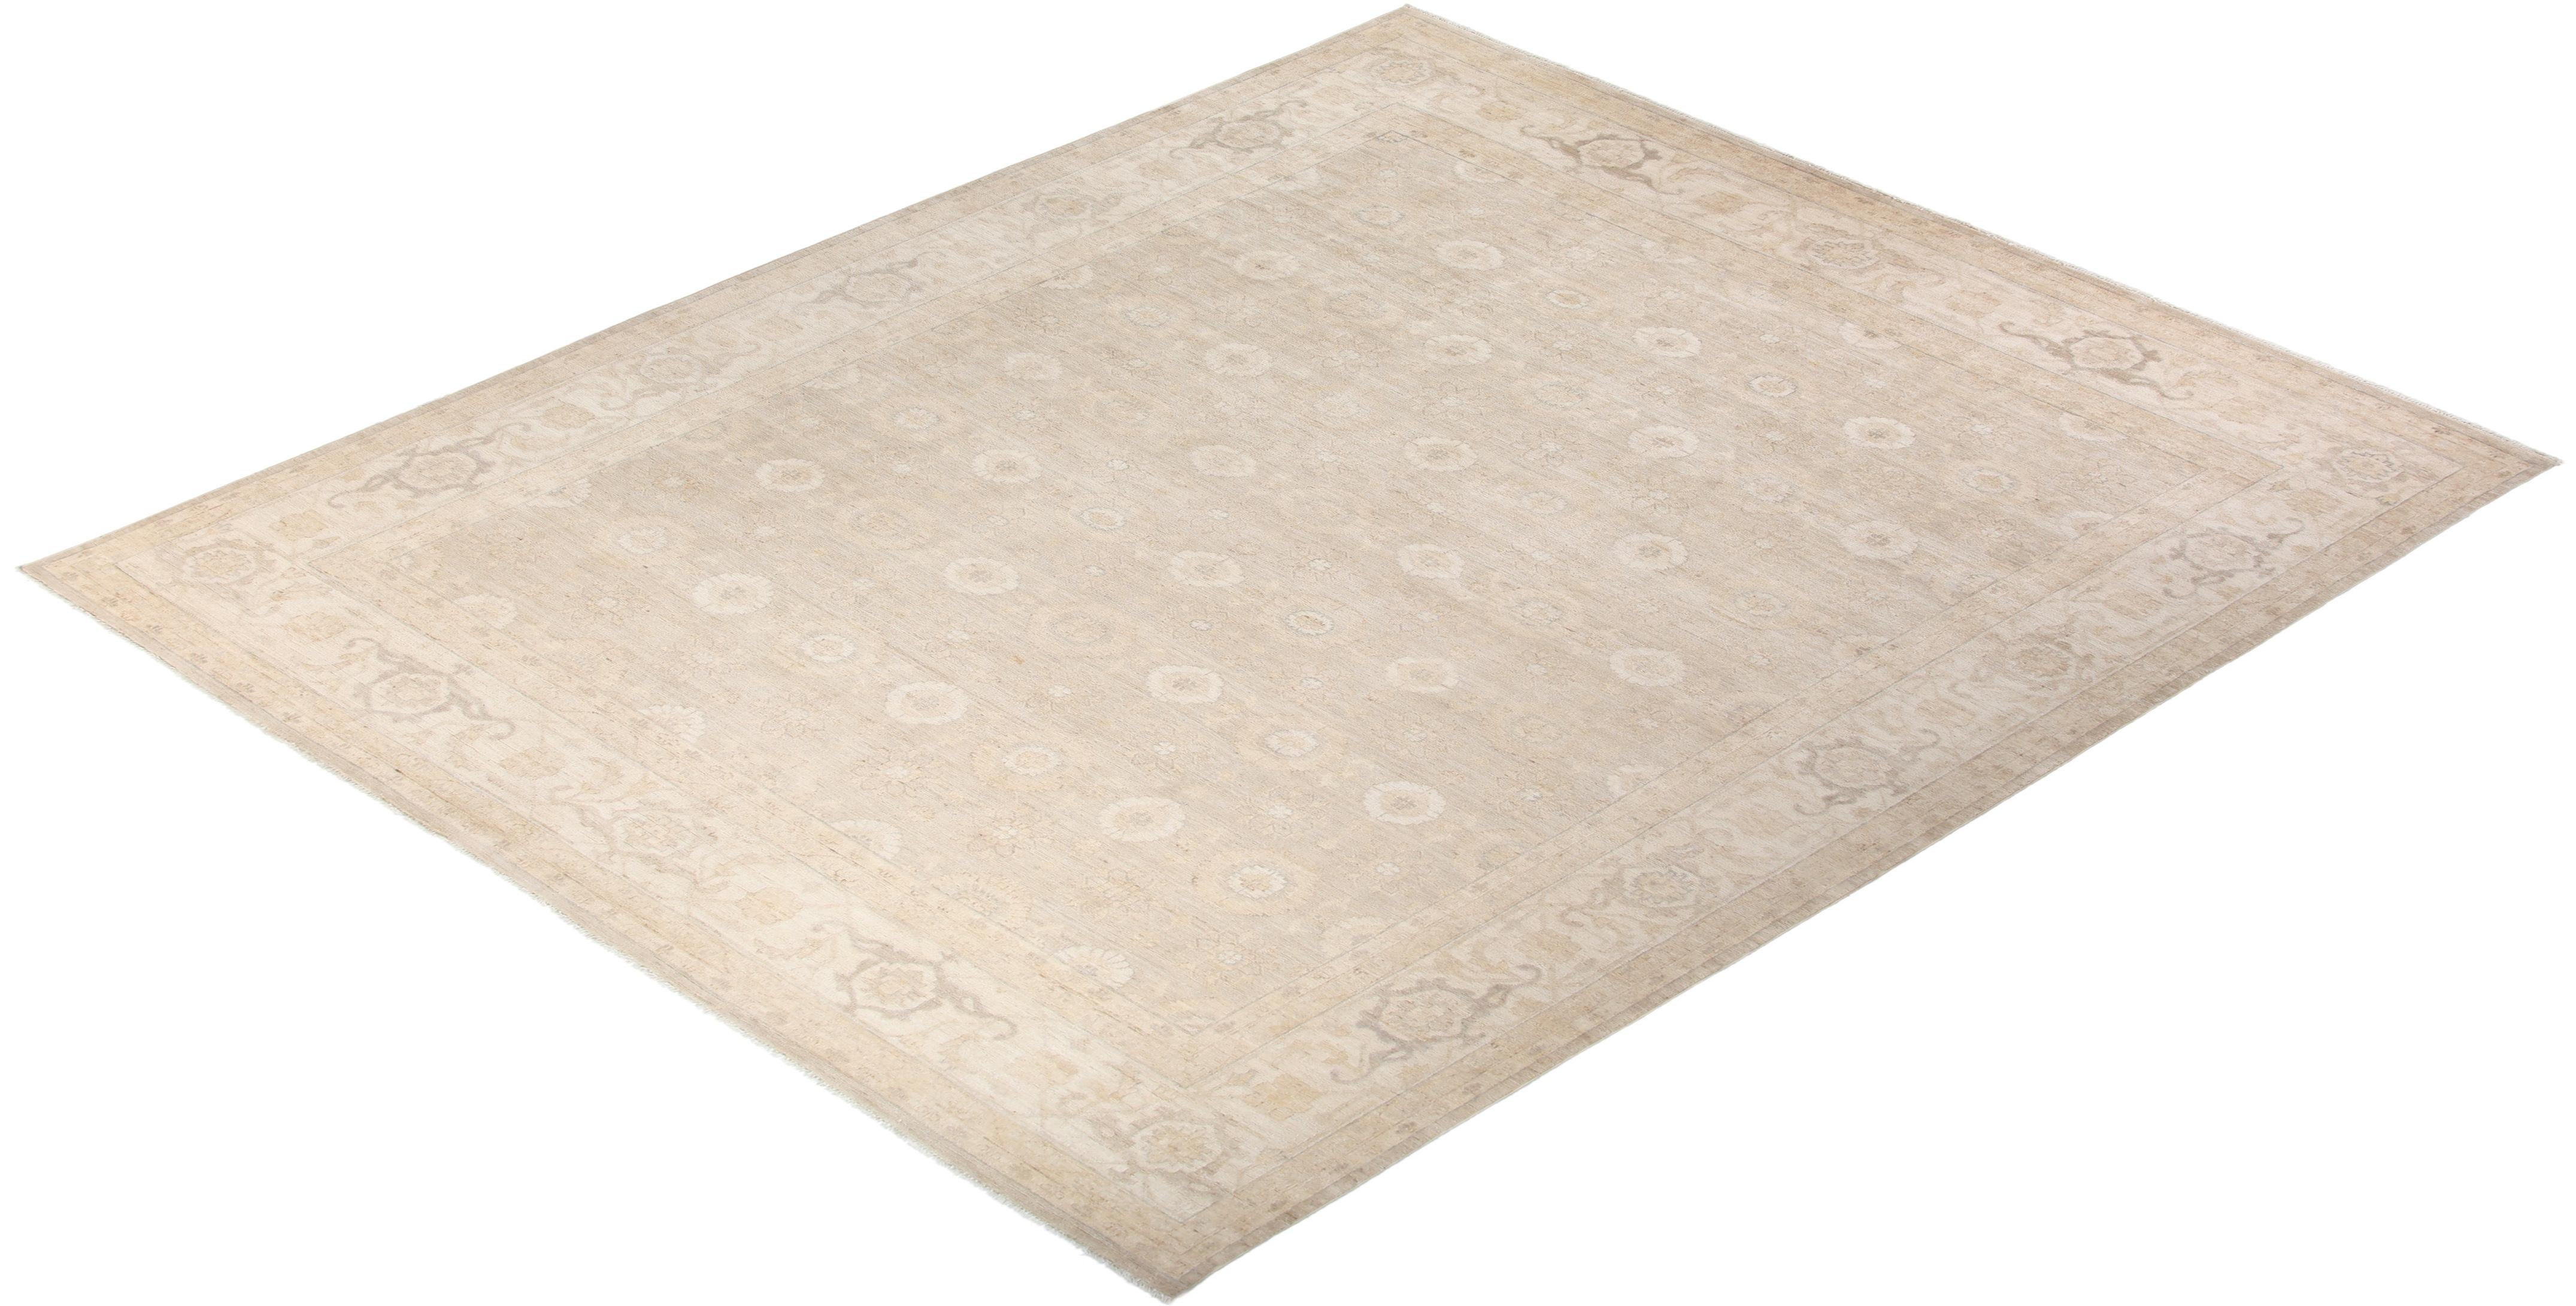 Wool Silky Oushak, Hand Knotted Area Rug